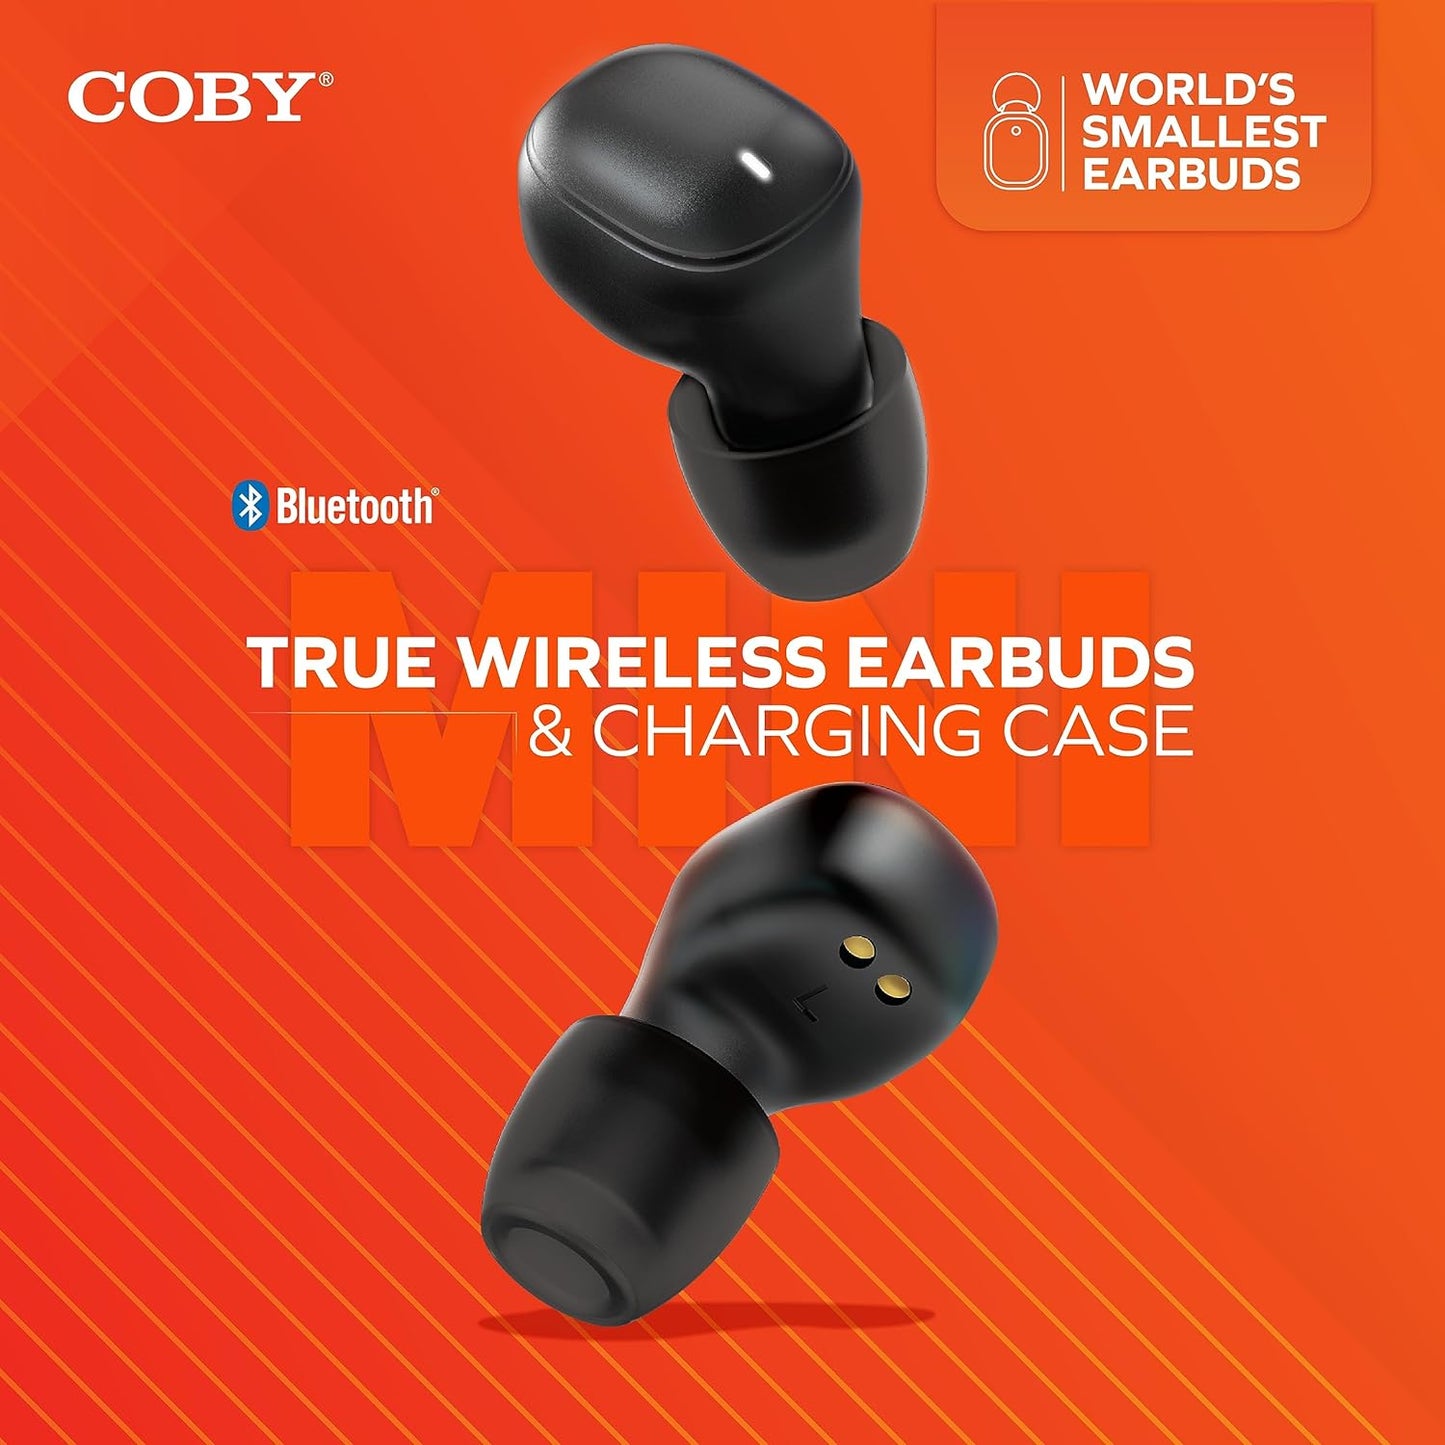 Worlds Smallest Earbuds - CETW536B